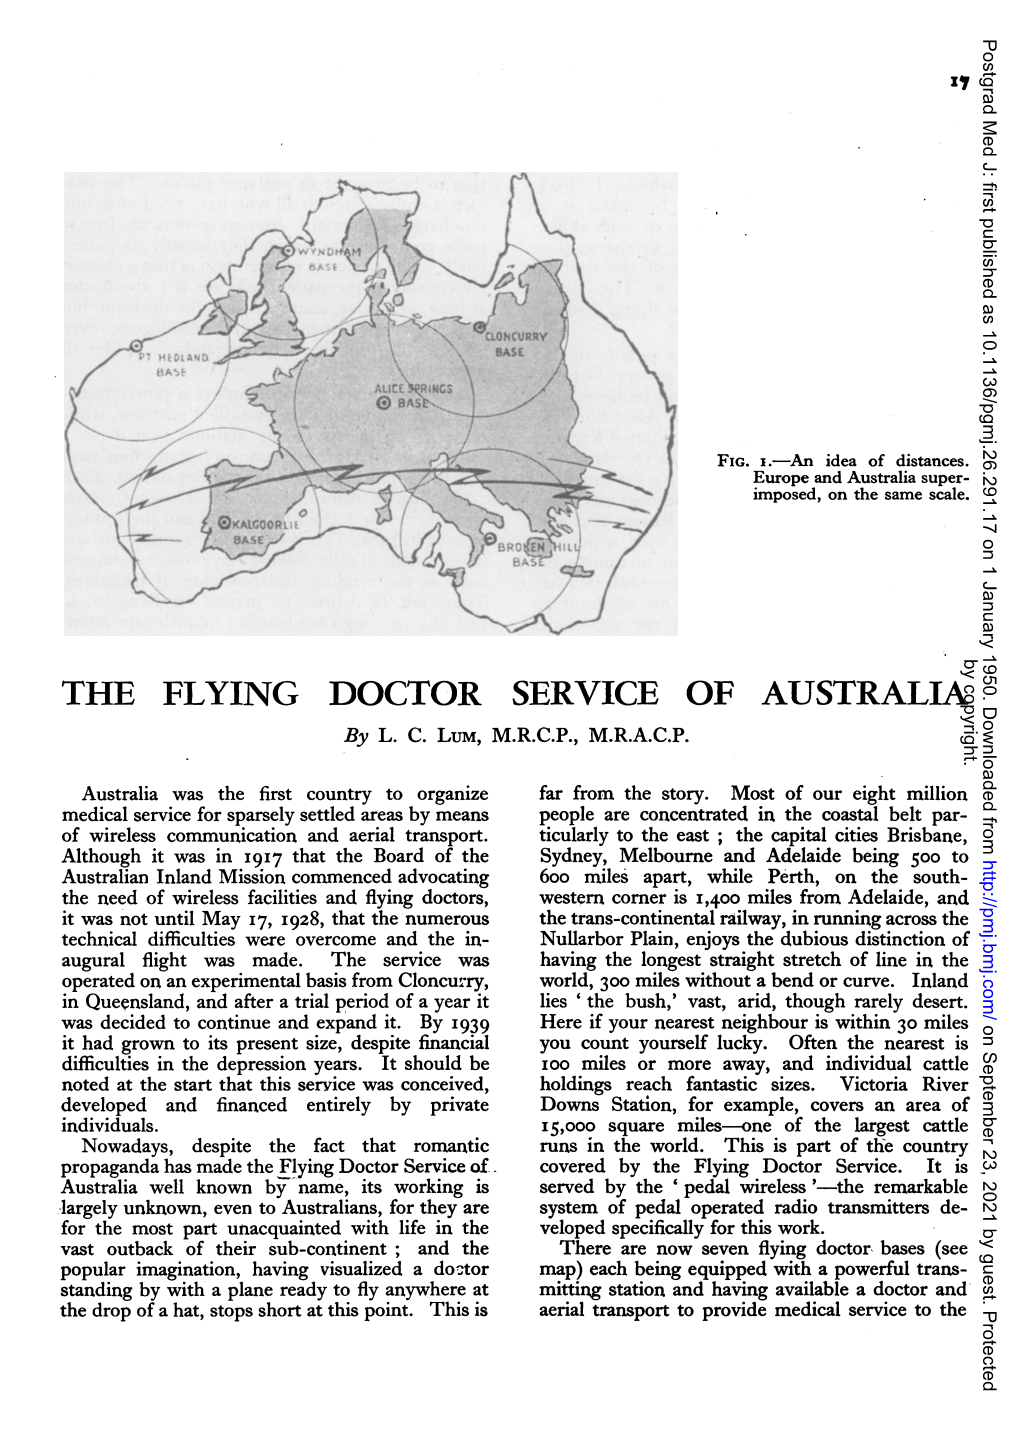 THE FLYING DOCTOR SERVICE of AUSTRALIA by L